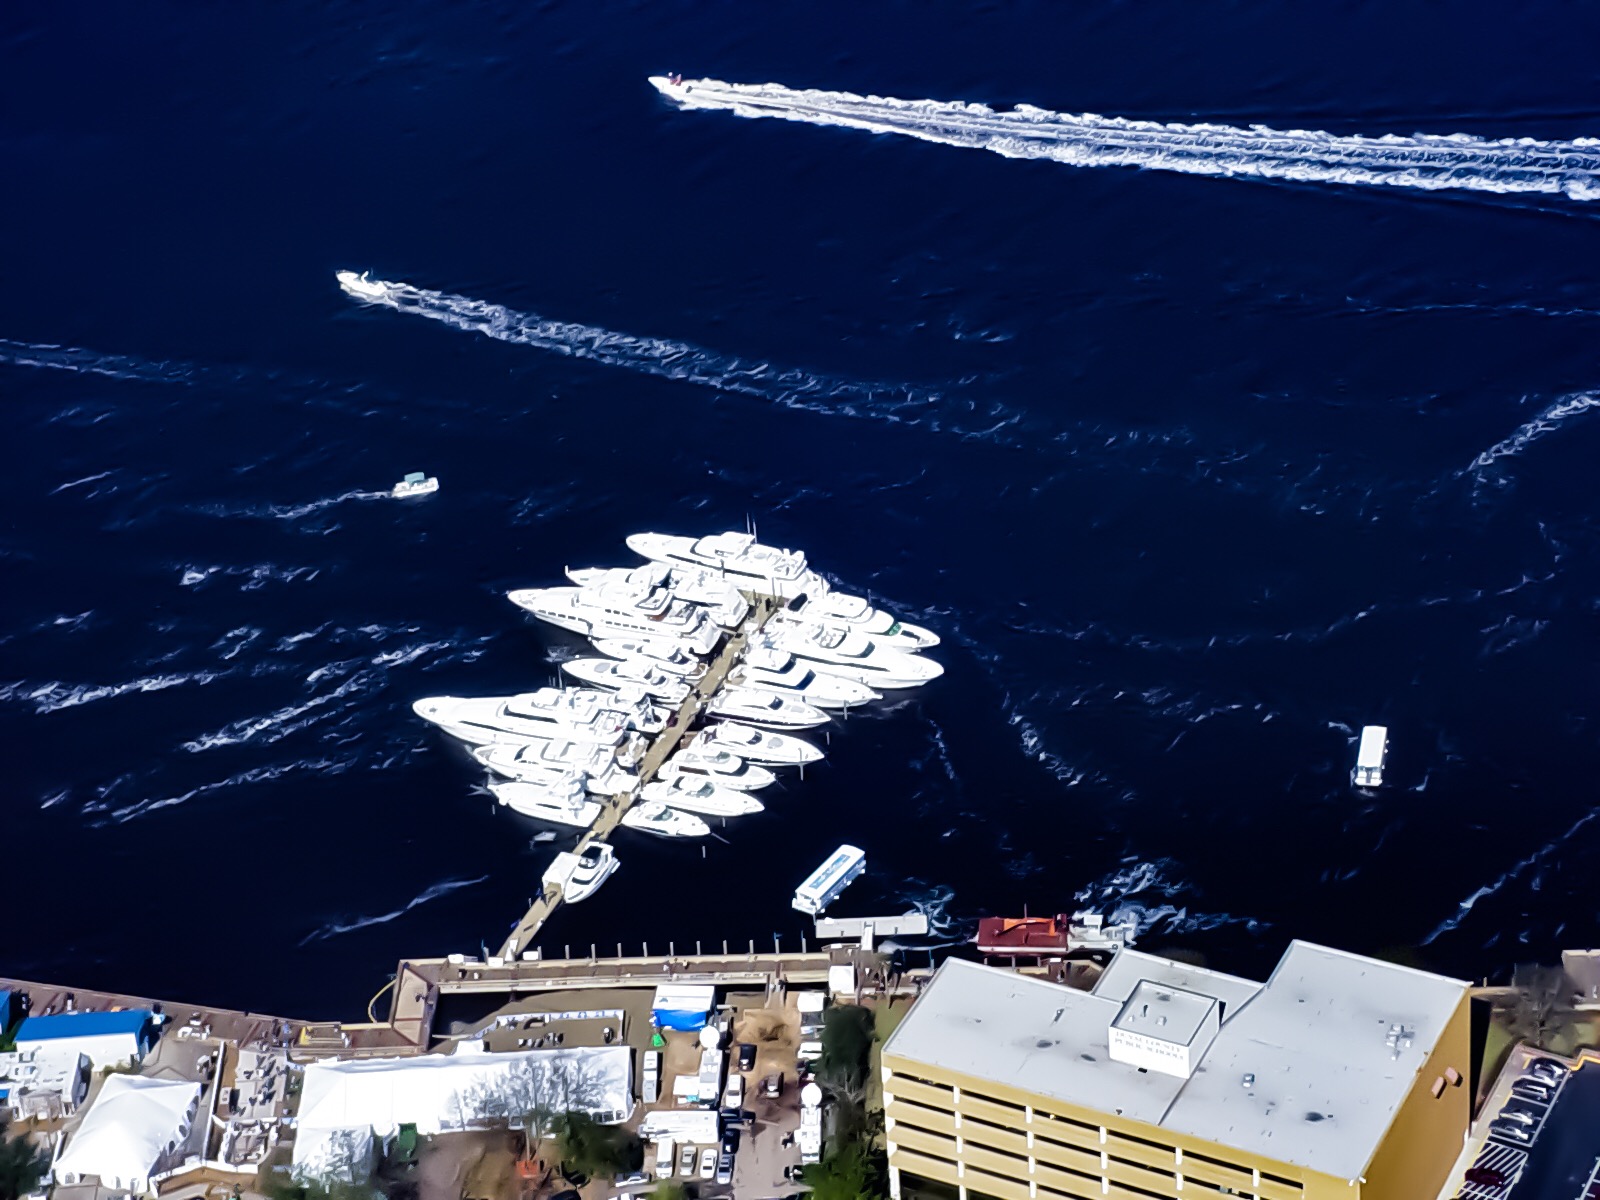 Super Bowl XXXLX - Aerial Shot of floating dock in rough water - Allsports Productions